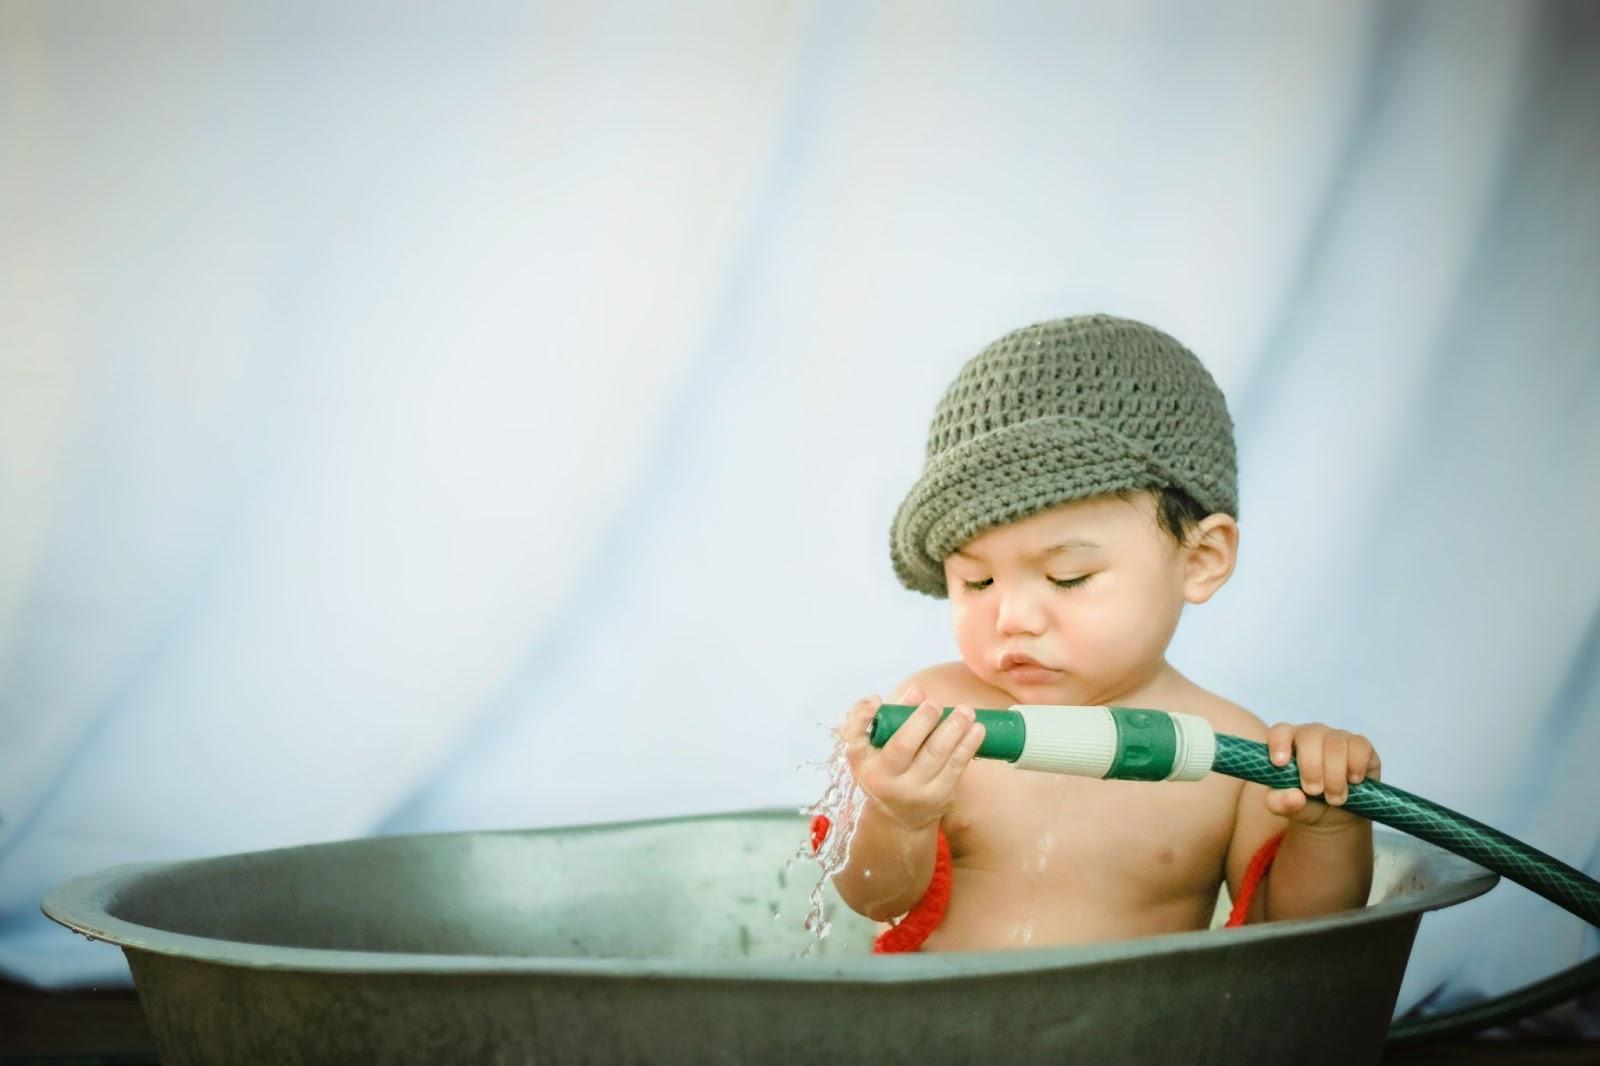 Little boy wearing a crochet cap sitting in a big tub holding an open hose - Baby Names That Mean Curious - Baby Journey